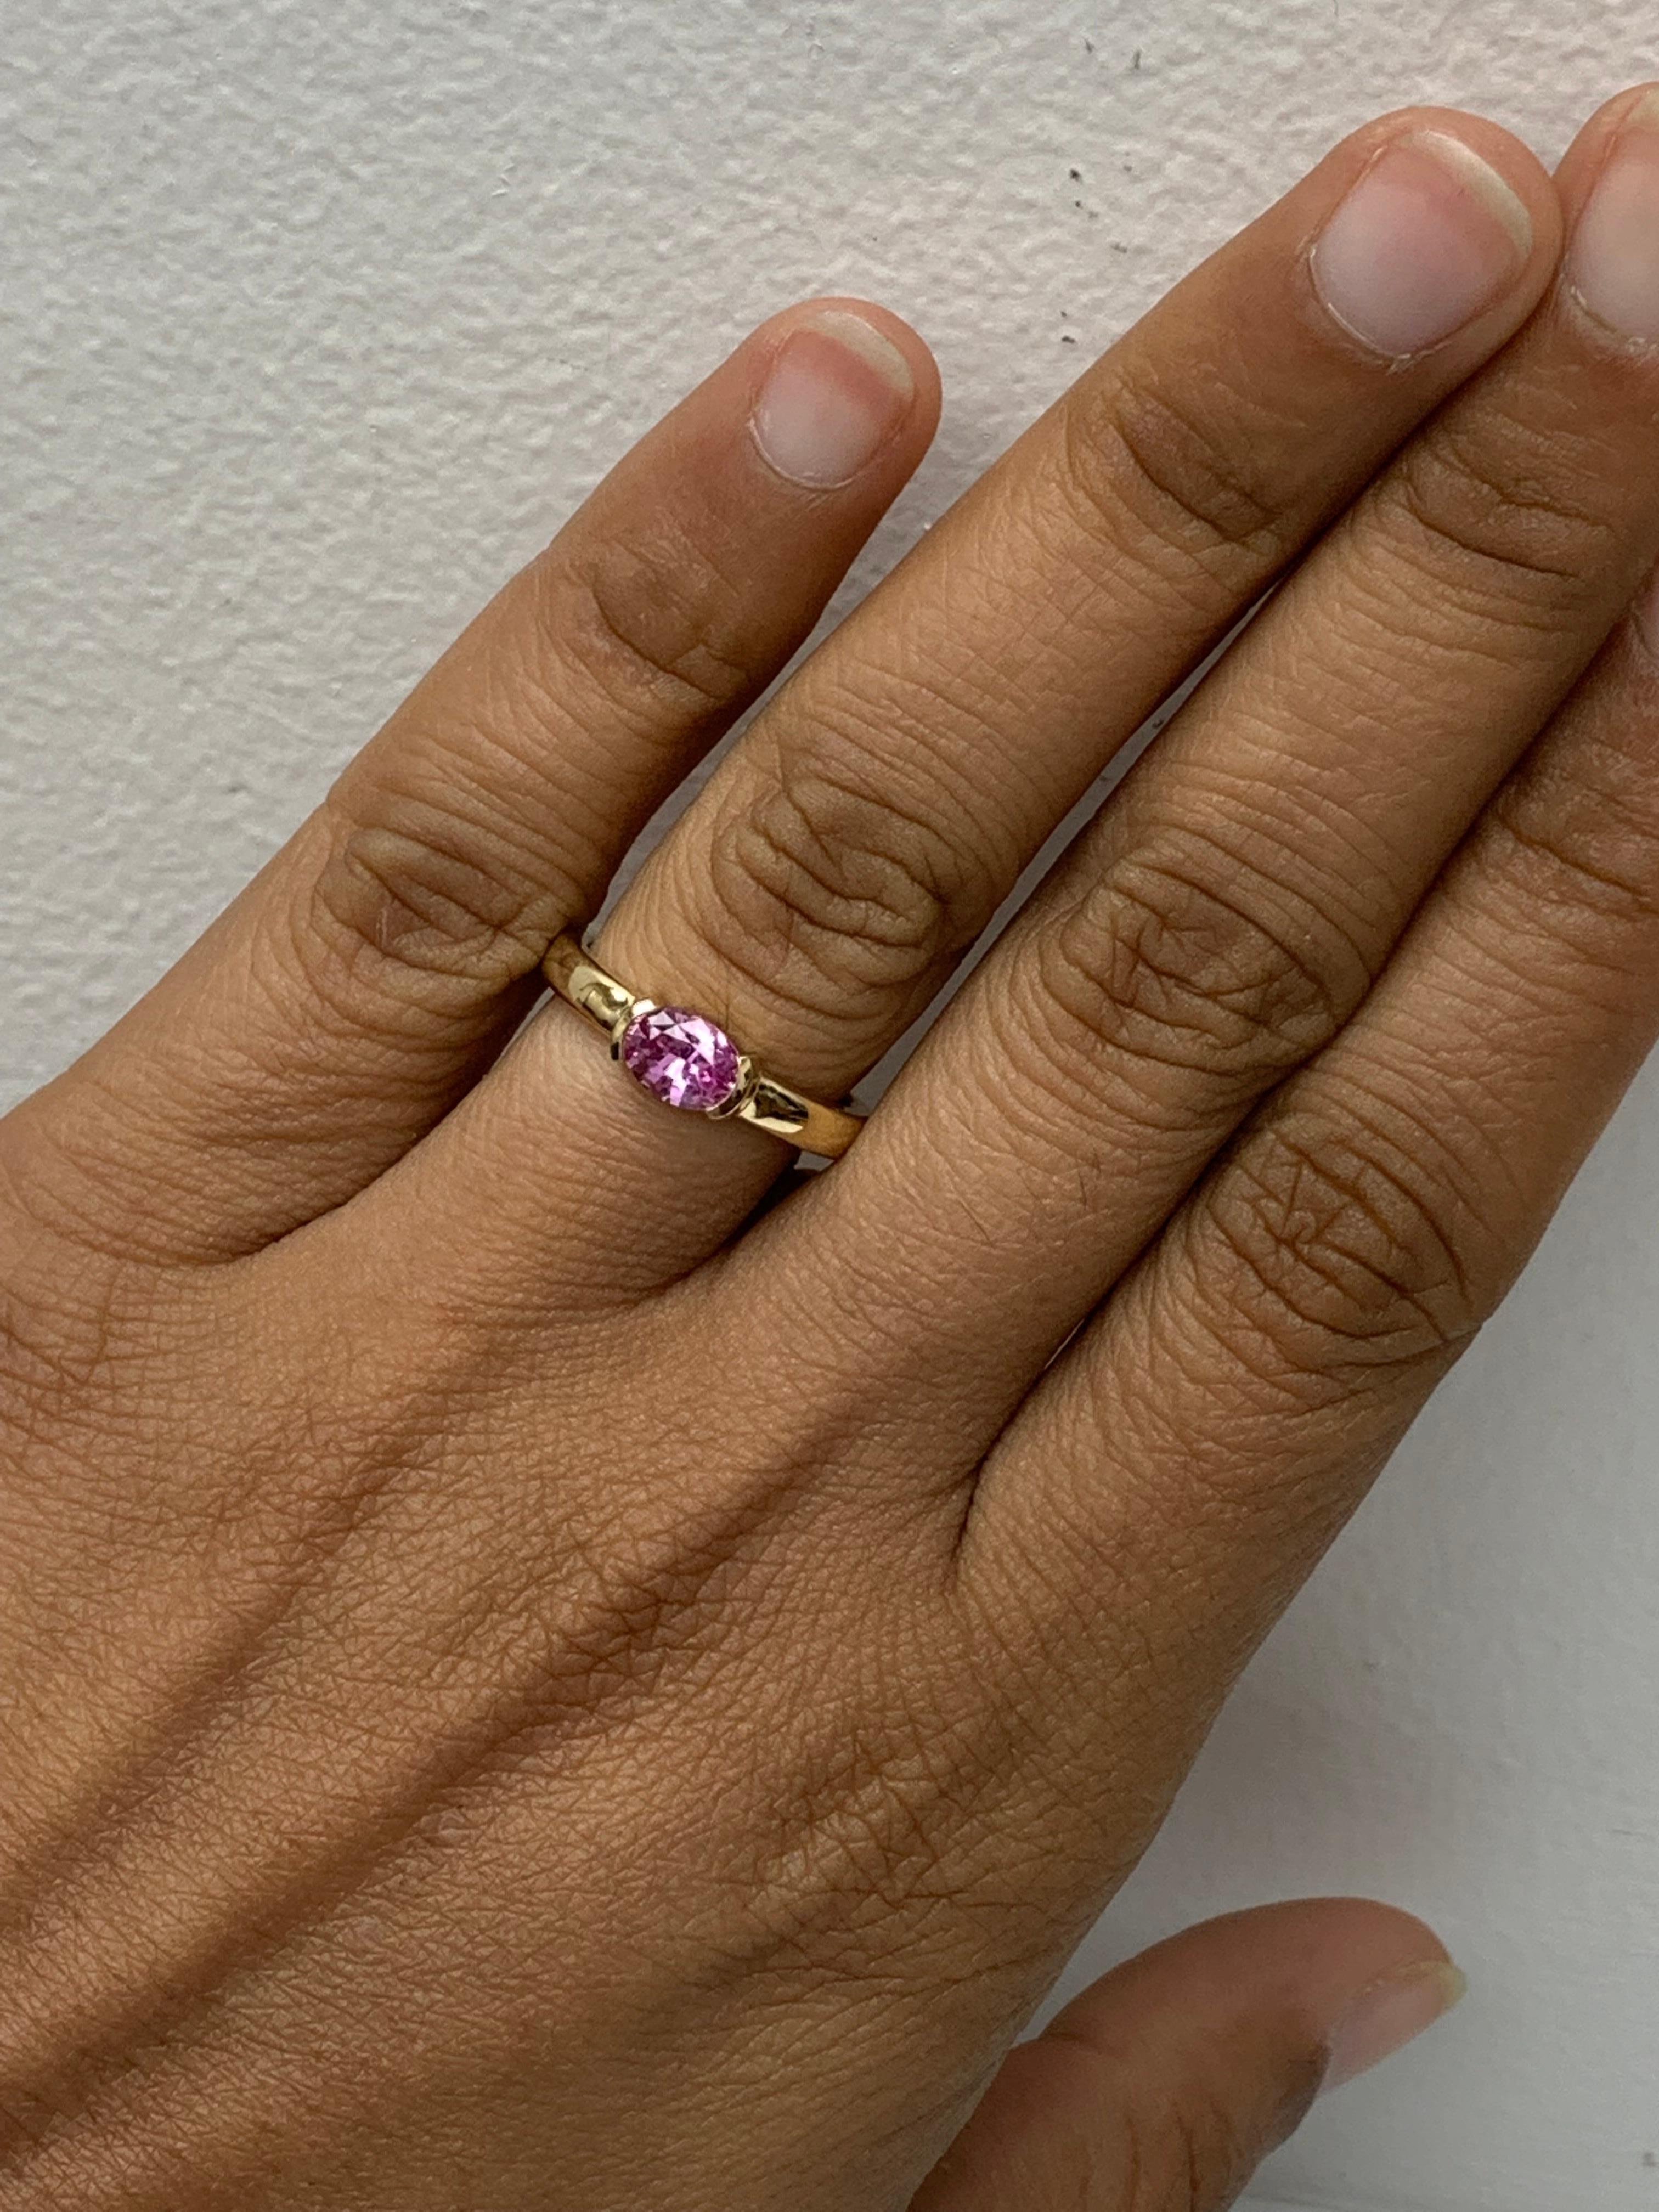 0.73 Carat Oval Cut Pink Sapphire Band Ring in 14K Yellow Gold For Sale 3